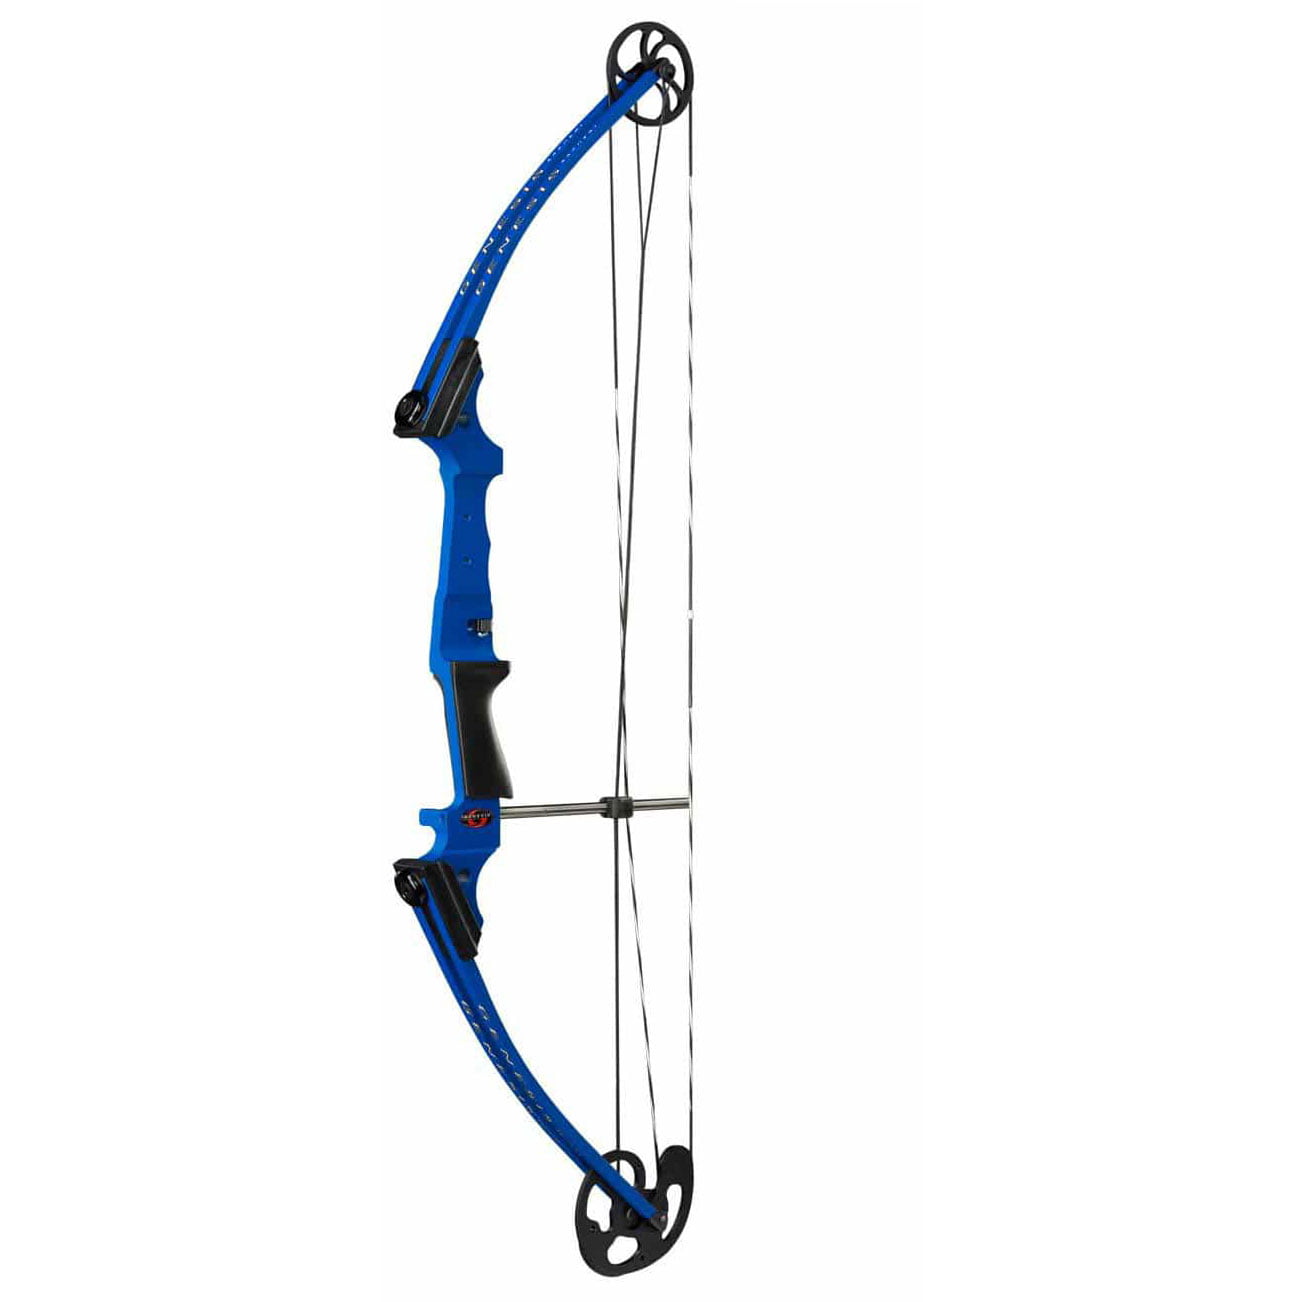 real recurve bow and arrow